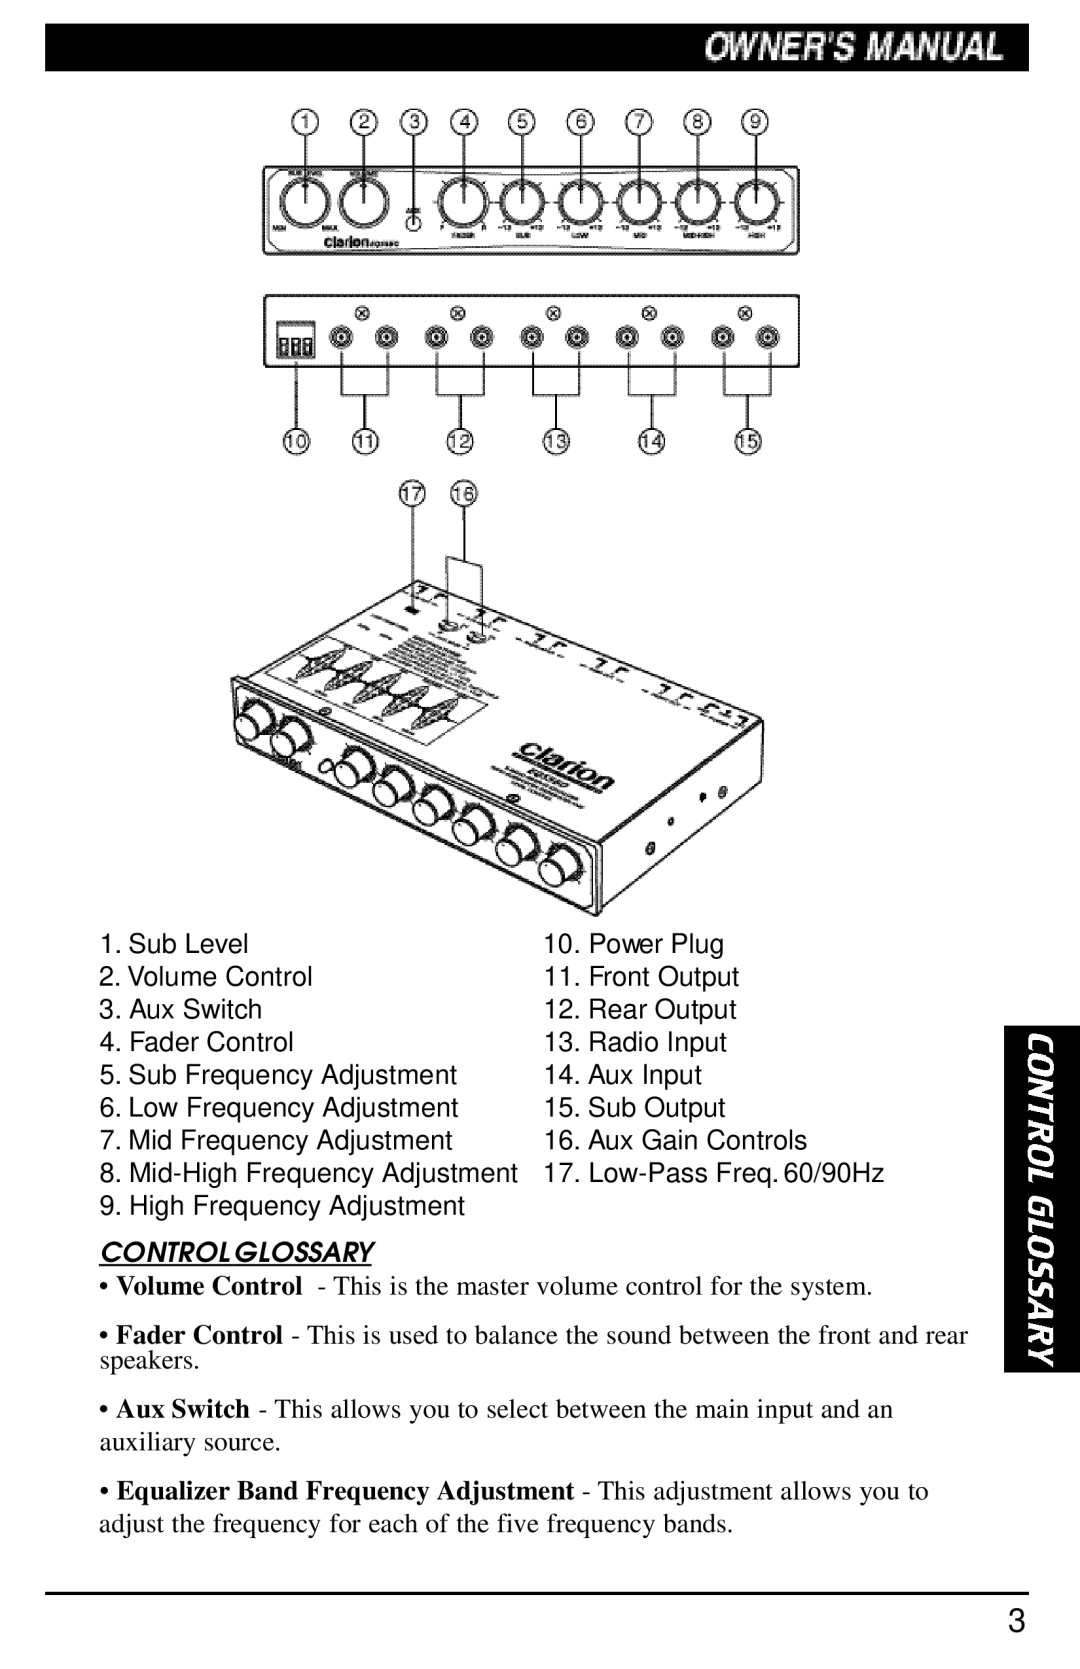 Clarion EQS560 manual Control Glossary 